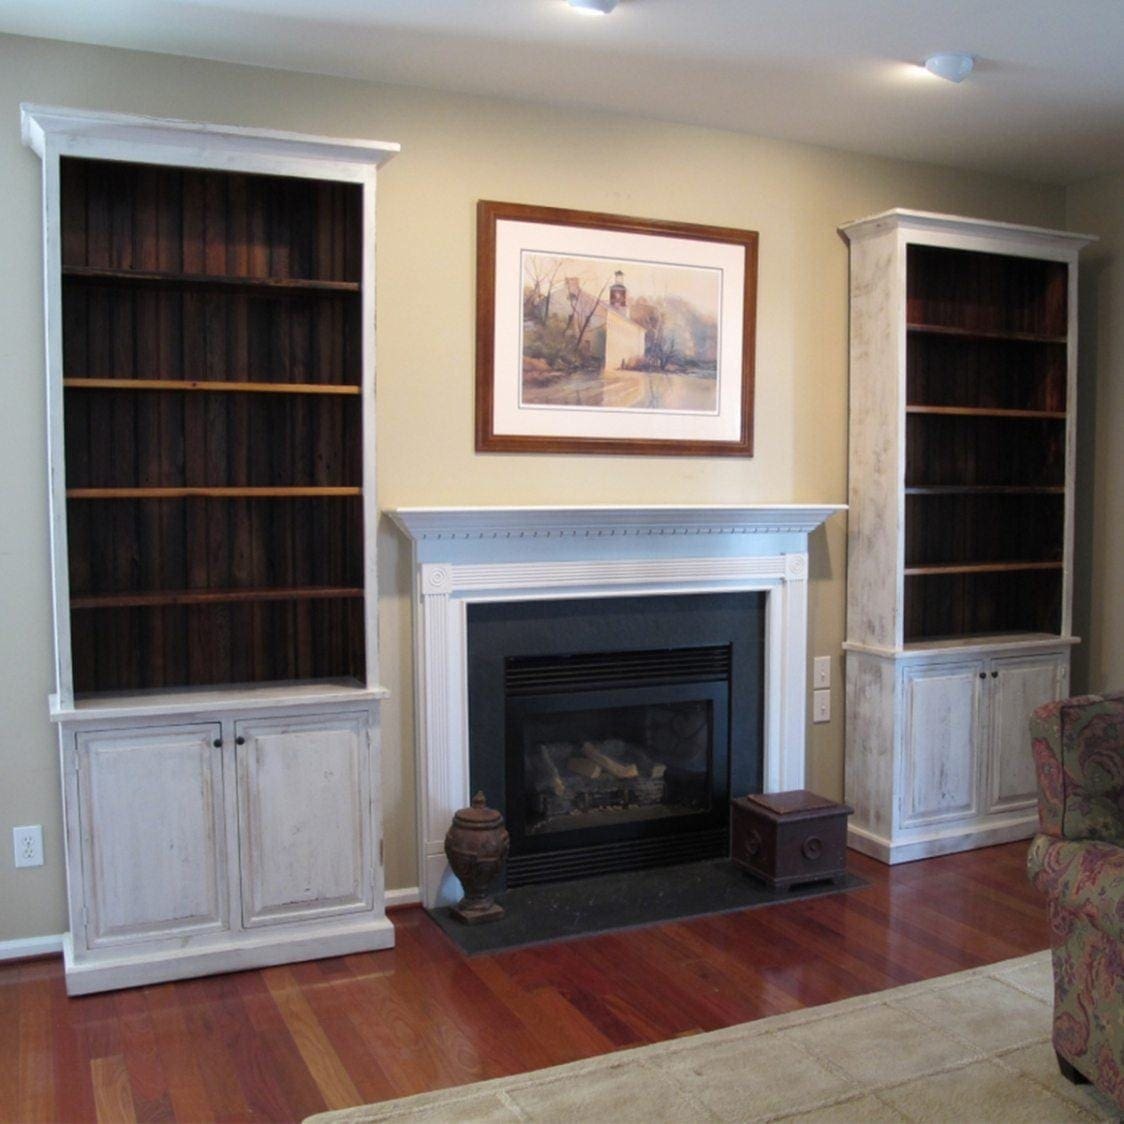 Bookcases With Doors Furniture From, Bookshelves Either Side Of Fireplace